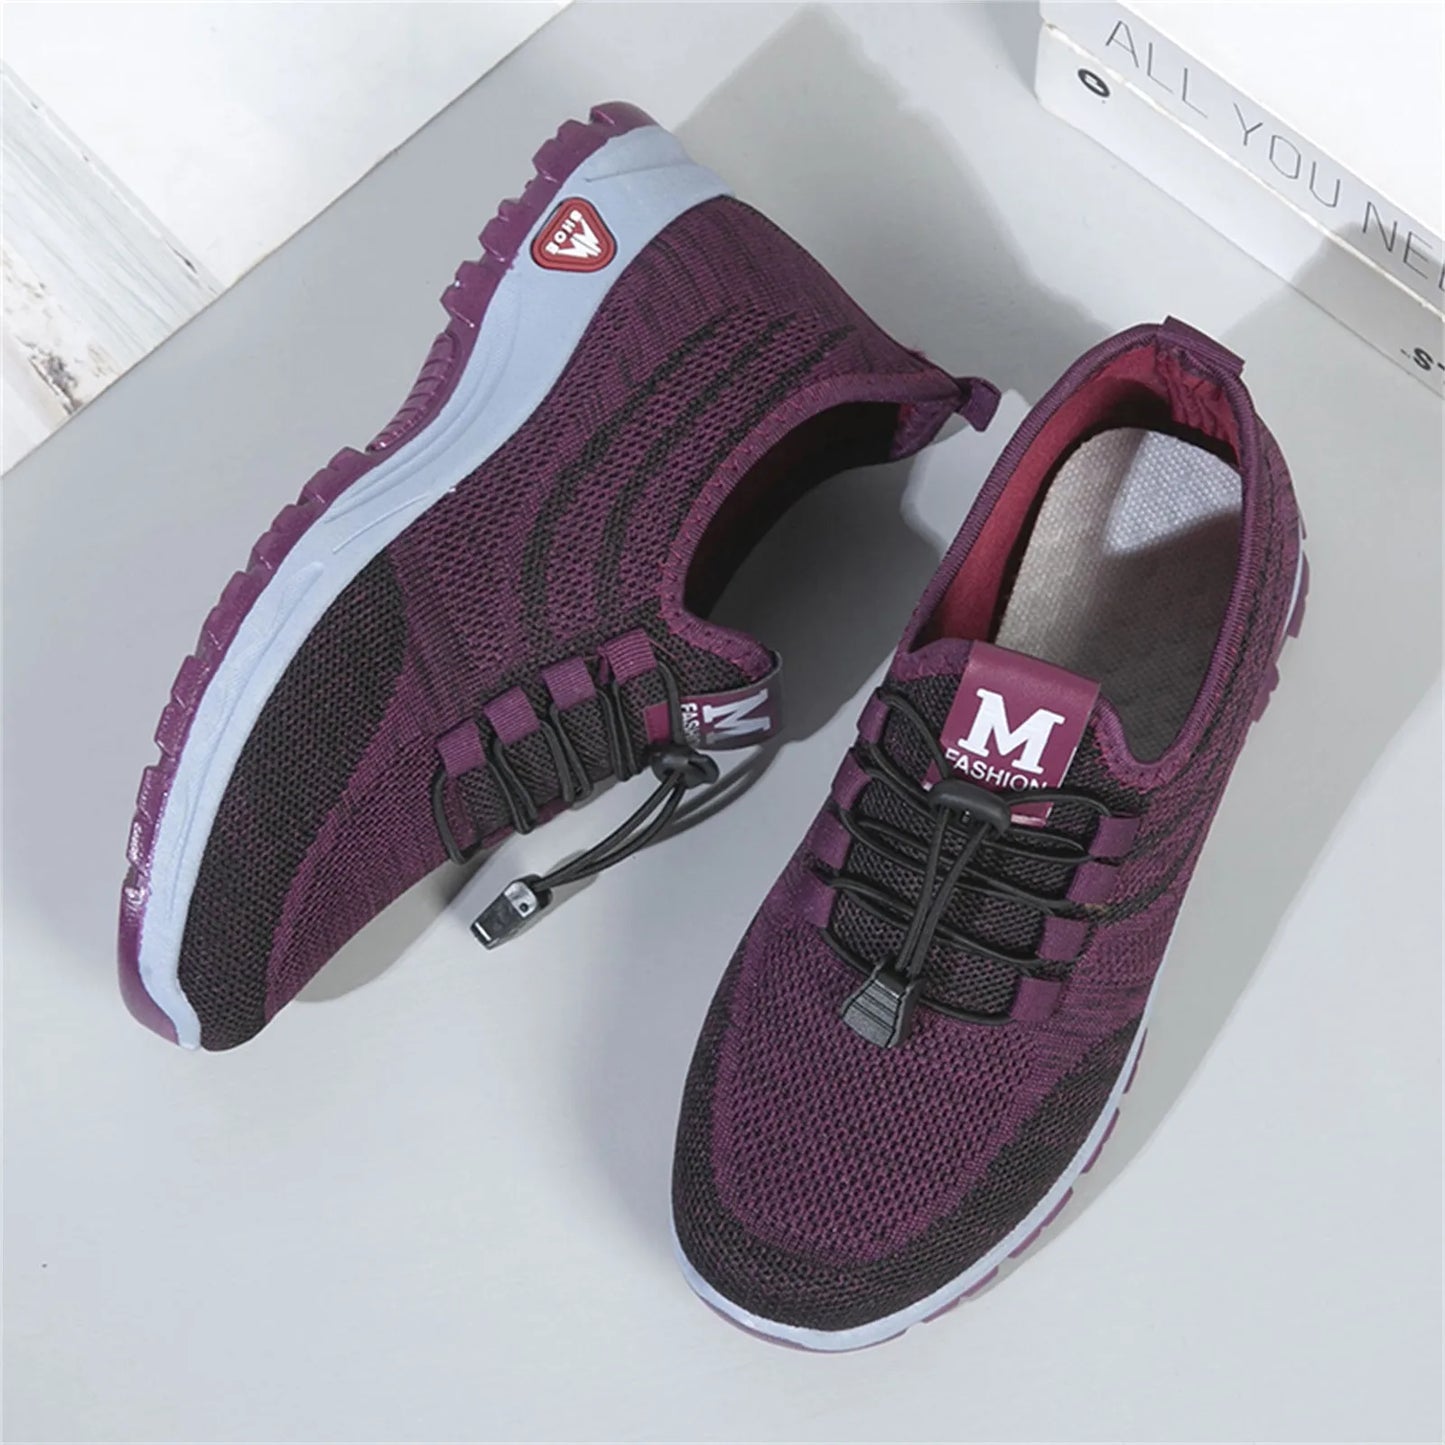 Tennis Shoes For Women Flat Bottom Non Slip Fly Woven Mesh Breathable/Casual Sneakers Woman Platform Sneakers